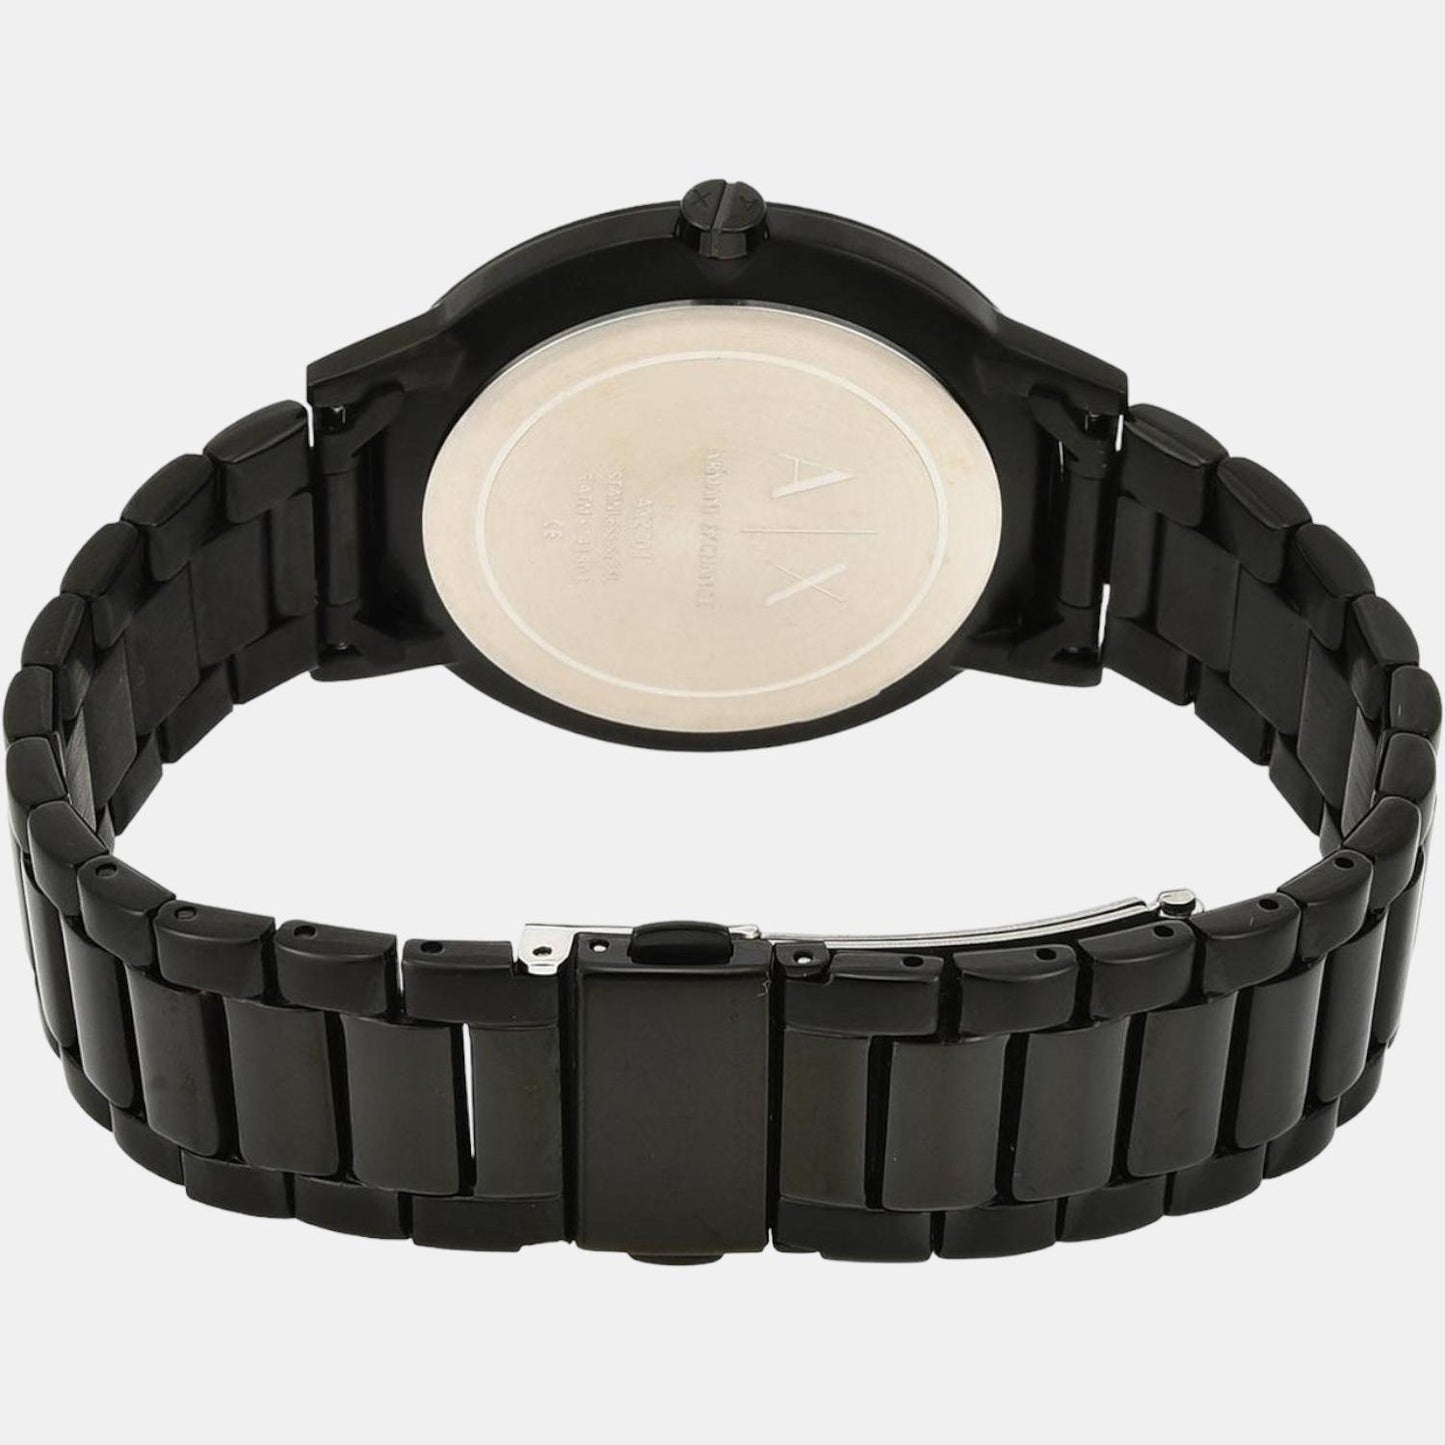 Male Black Analog Stainless Steel Watch AX2701